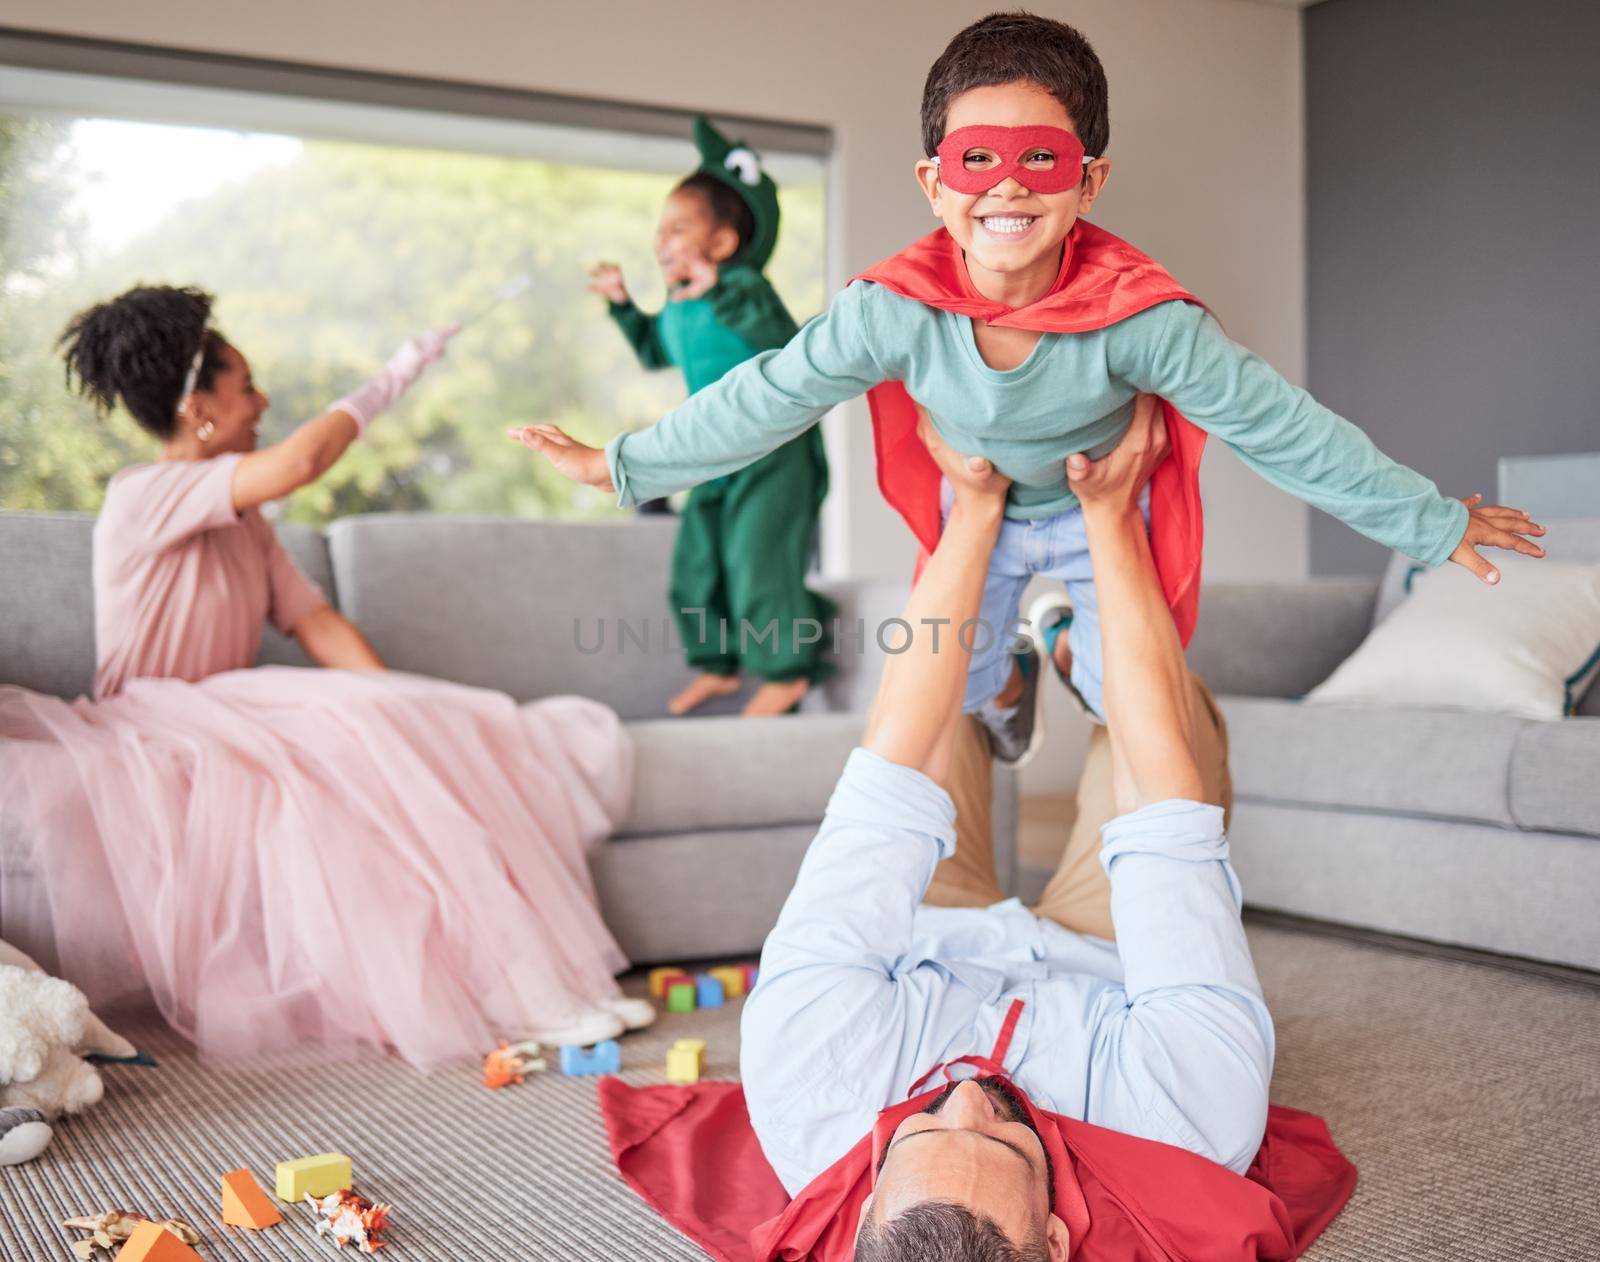 Happy parents and children in costume playing, bonding and having fun together in living room. Happiness, excited and family enjoying fantasy dress up for halloween entertainment with kids at home